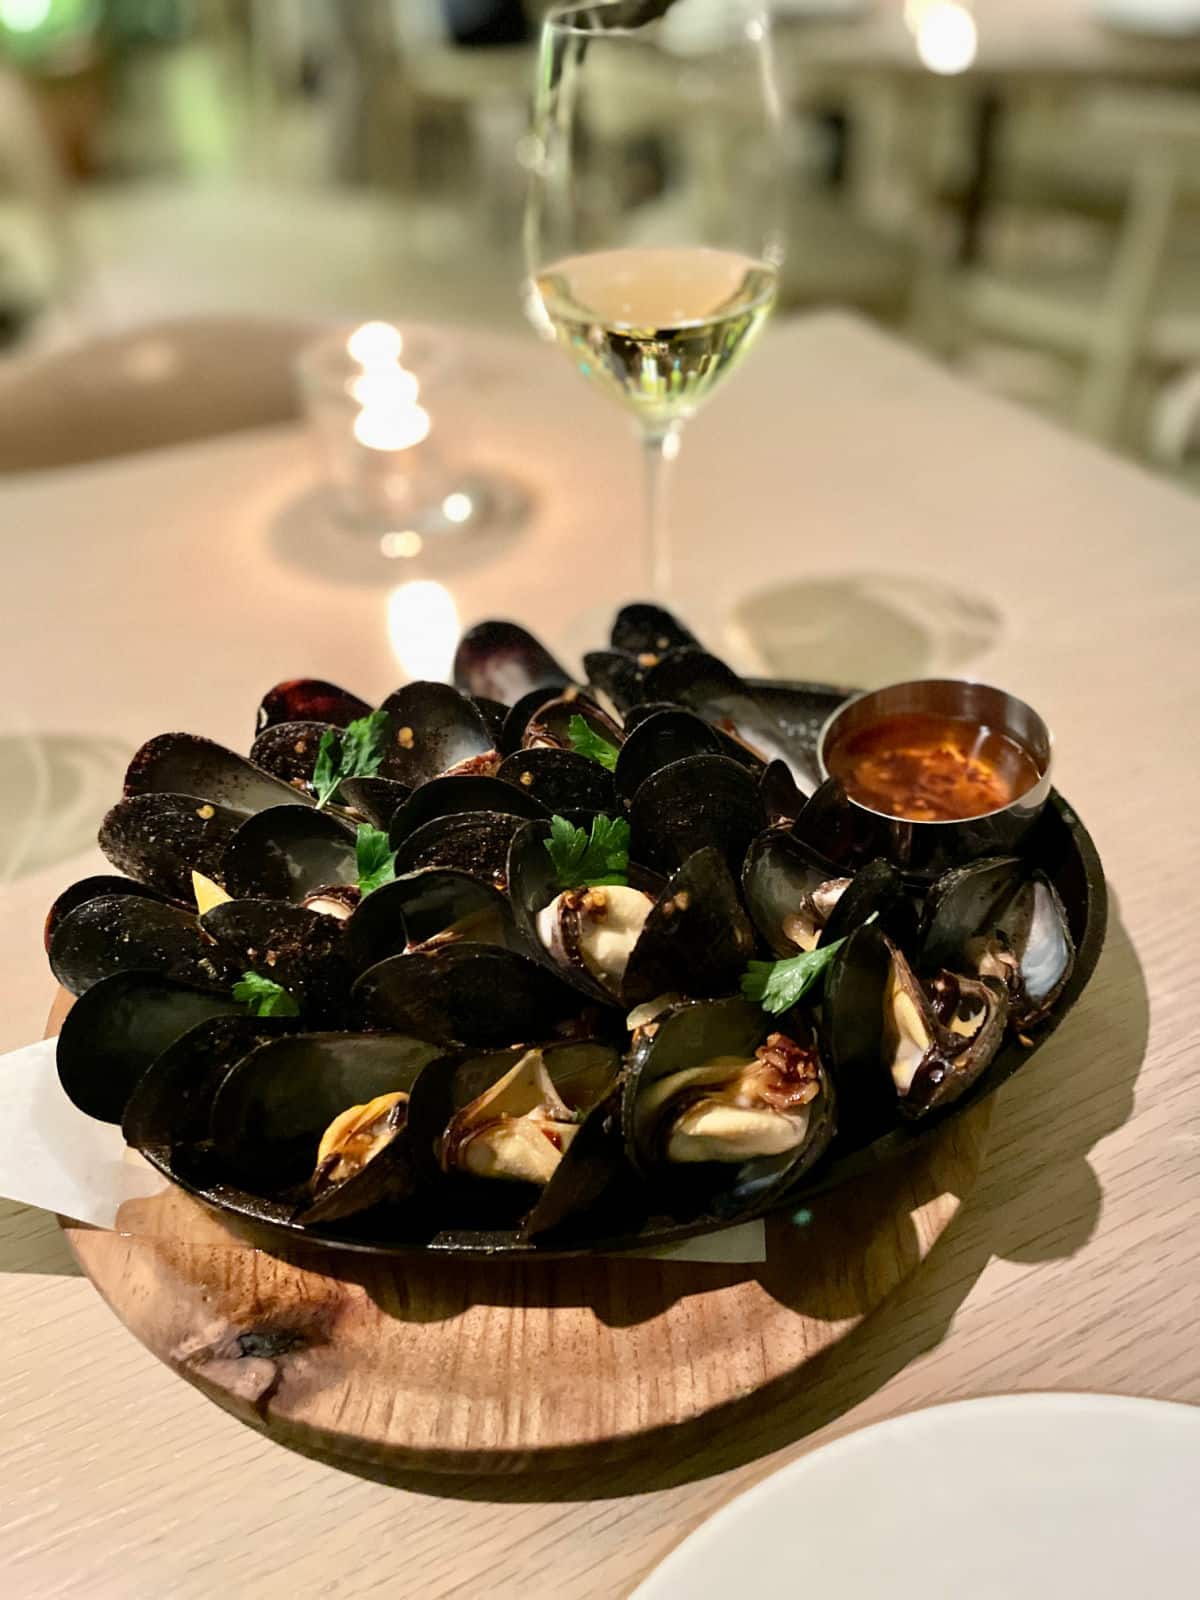 Mussels in a black bowl on a wood plate with chili oil and cilantro with a glass of wine in background.